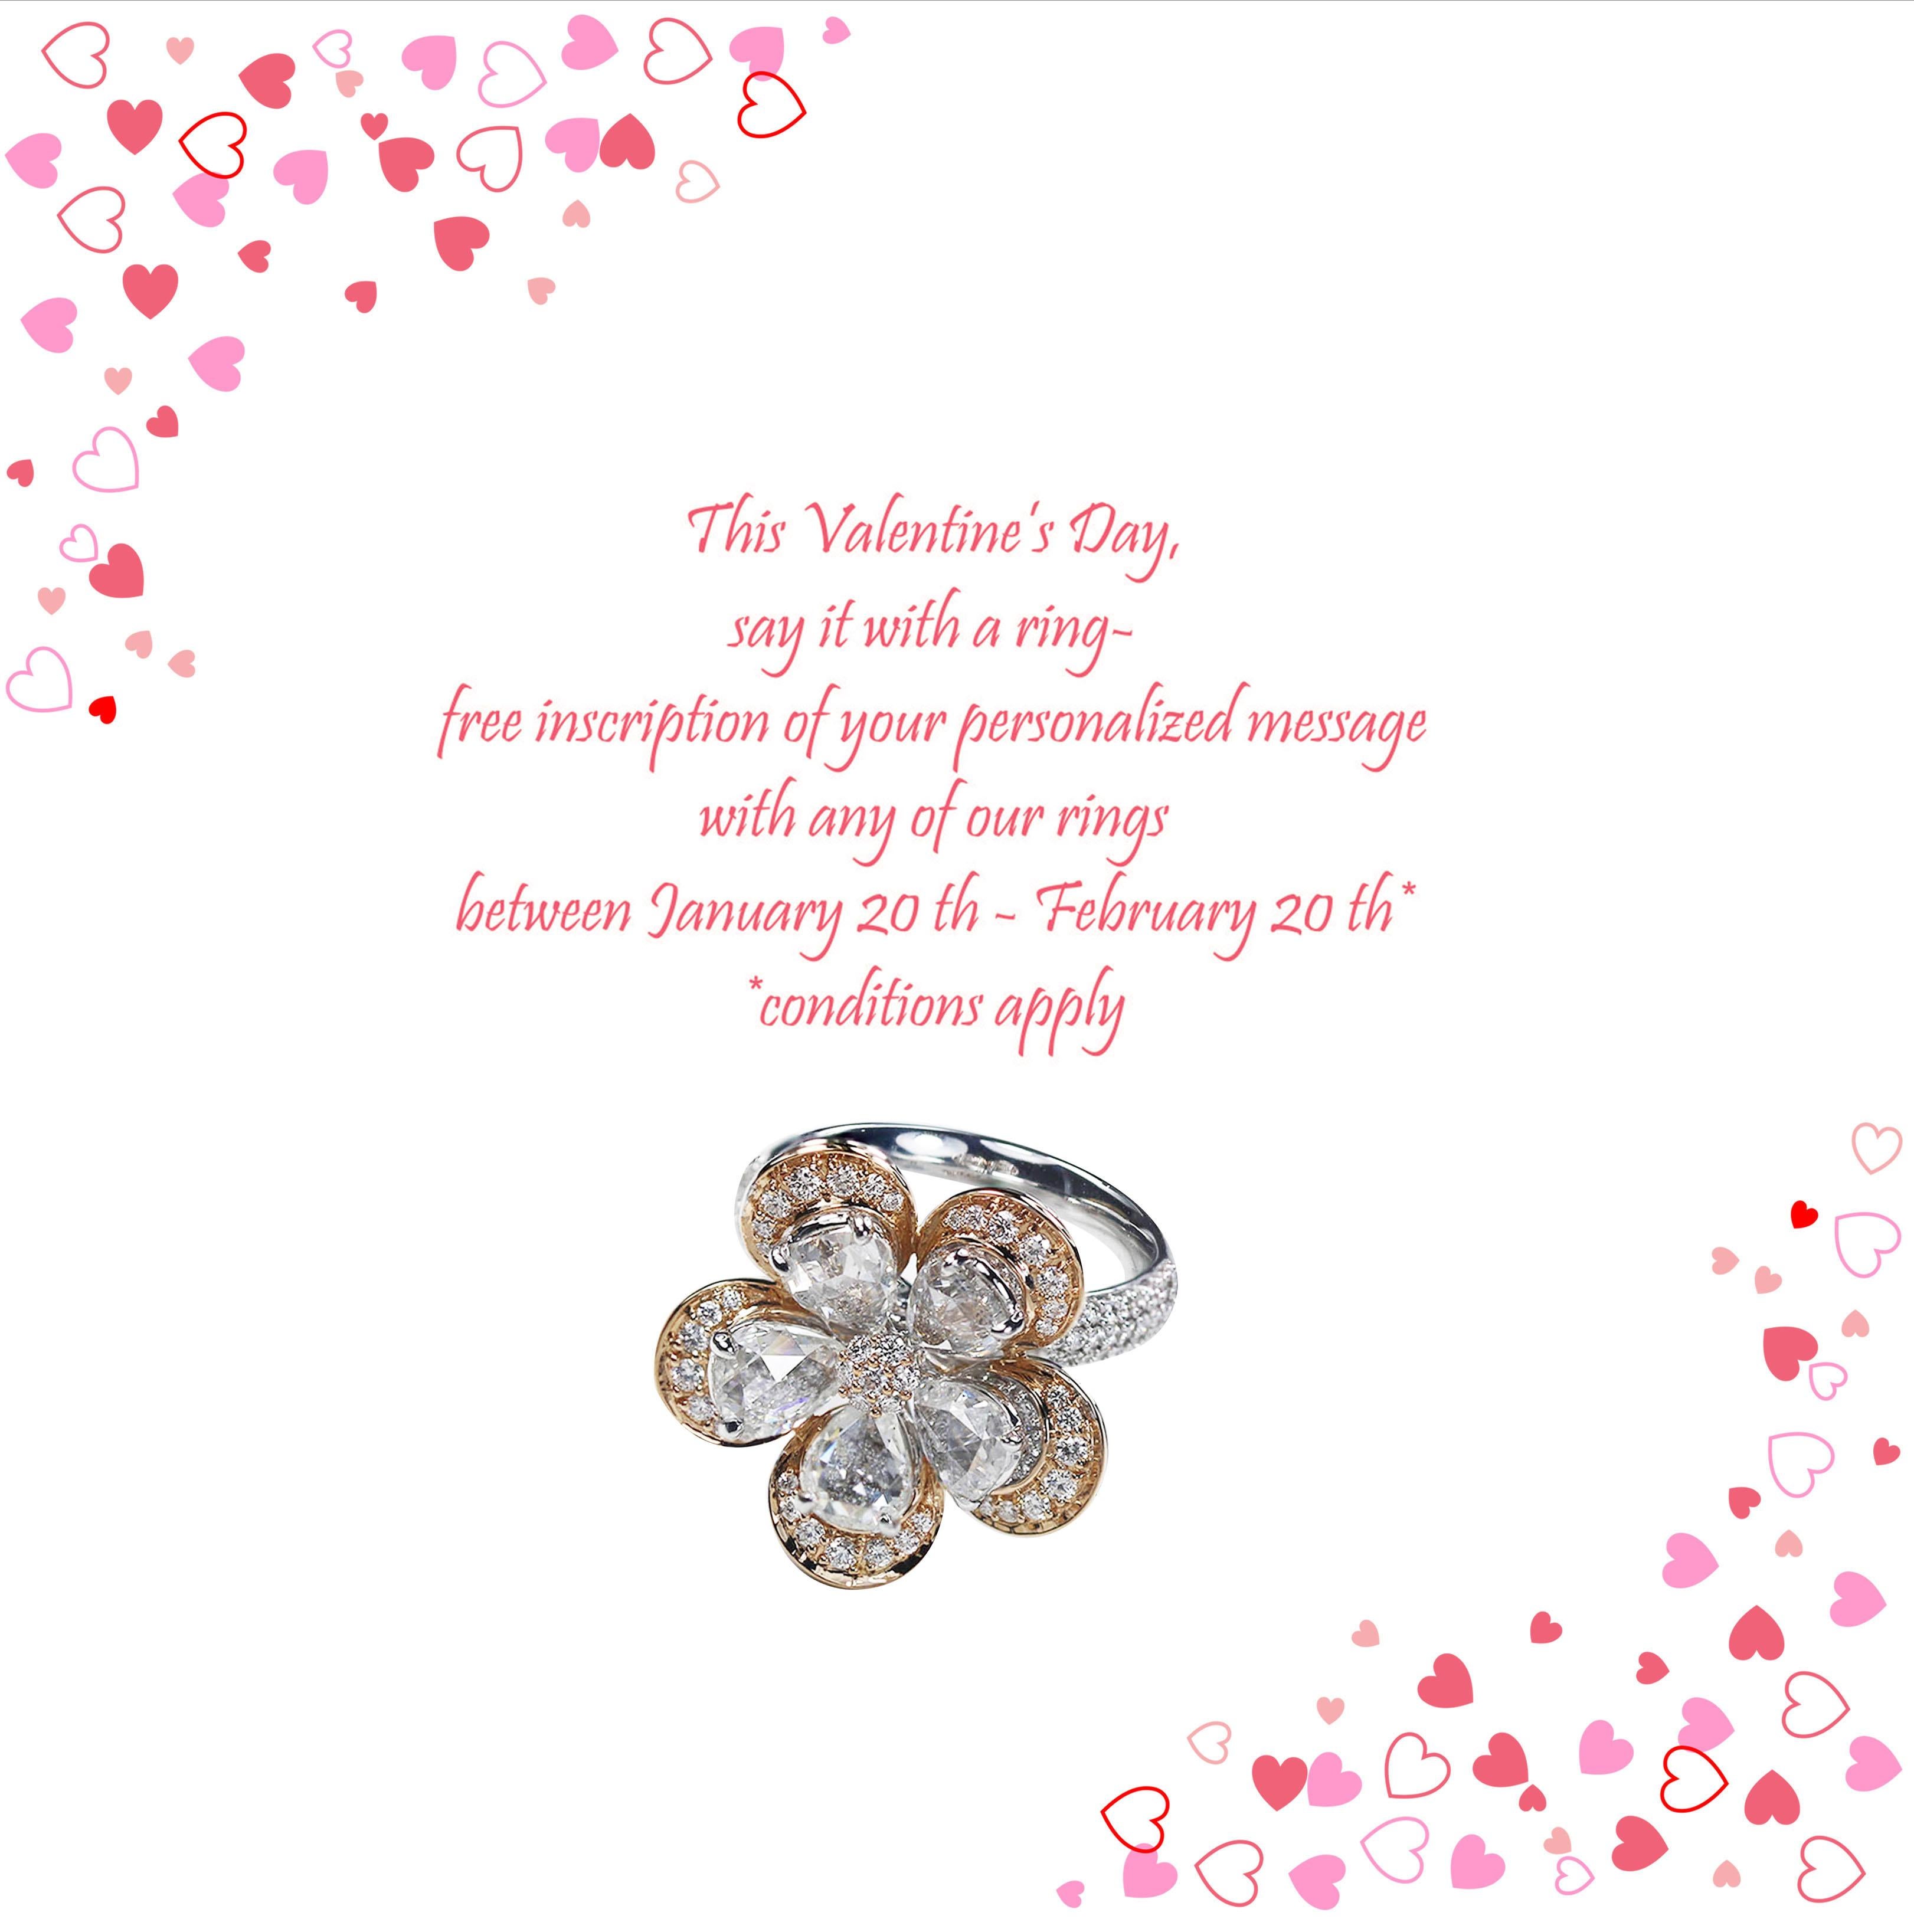 This Valentine’s Day, say it with a ring- free inscription of your personalized message with any of our rings between January 20 th - February 20 th* 

F-G-H/ VS-SI brilliant cut and Rosecut Floral Diamond Ring

Give into the eternal allure of